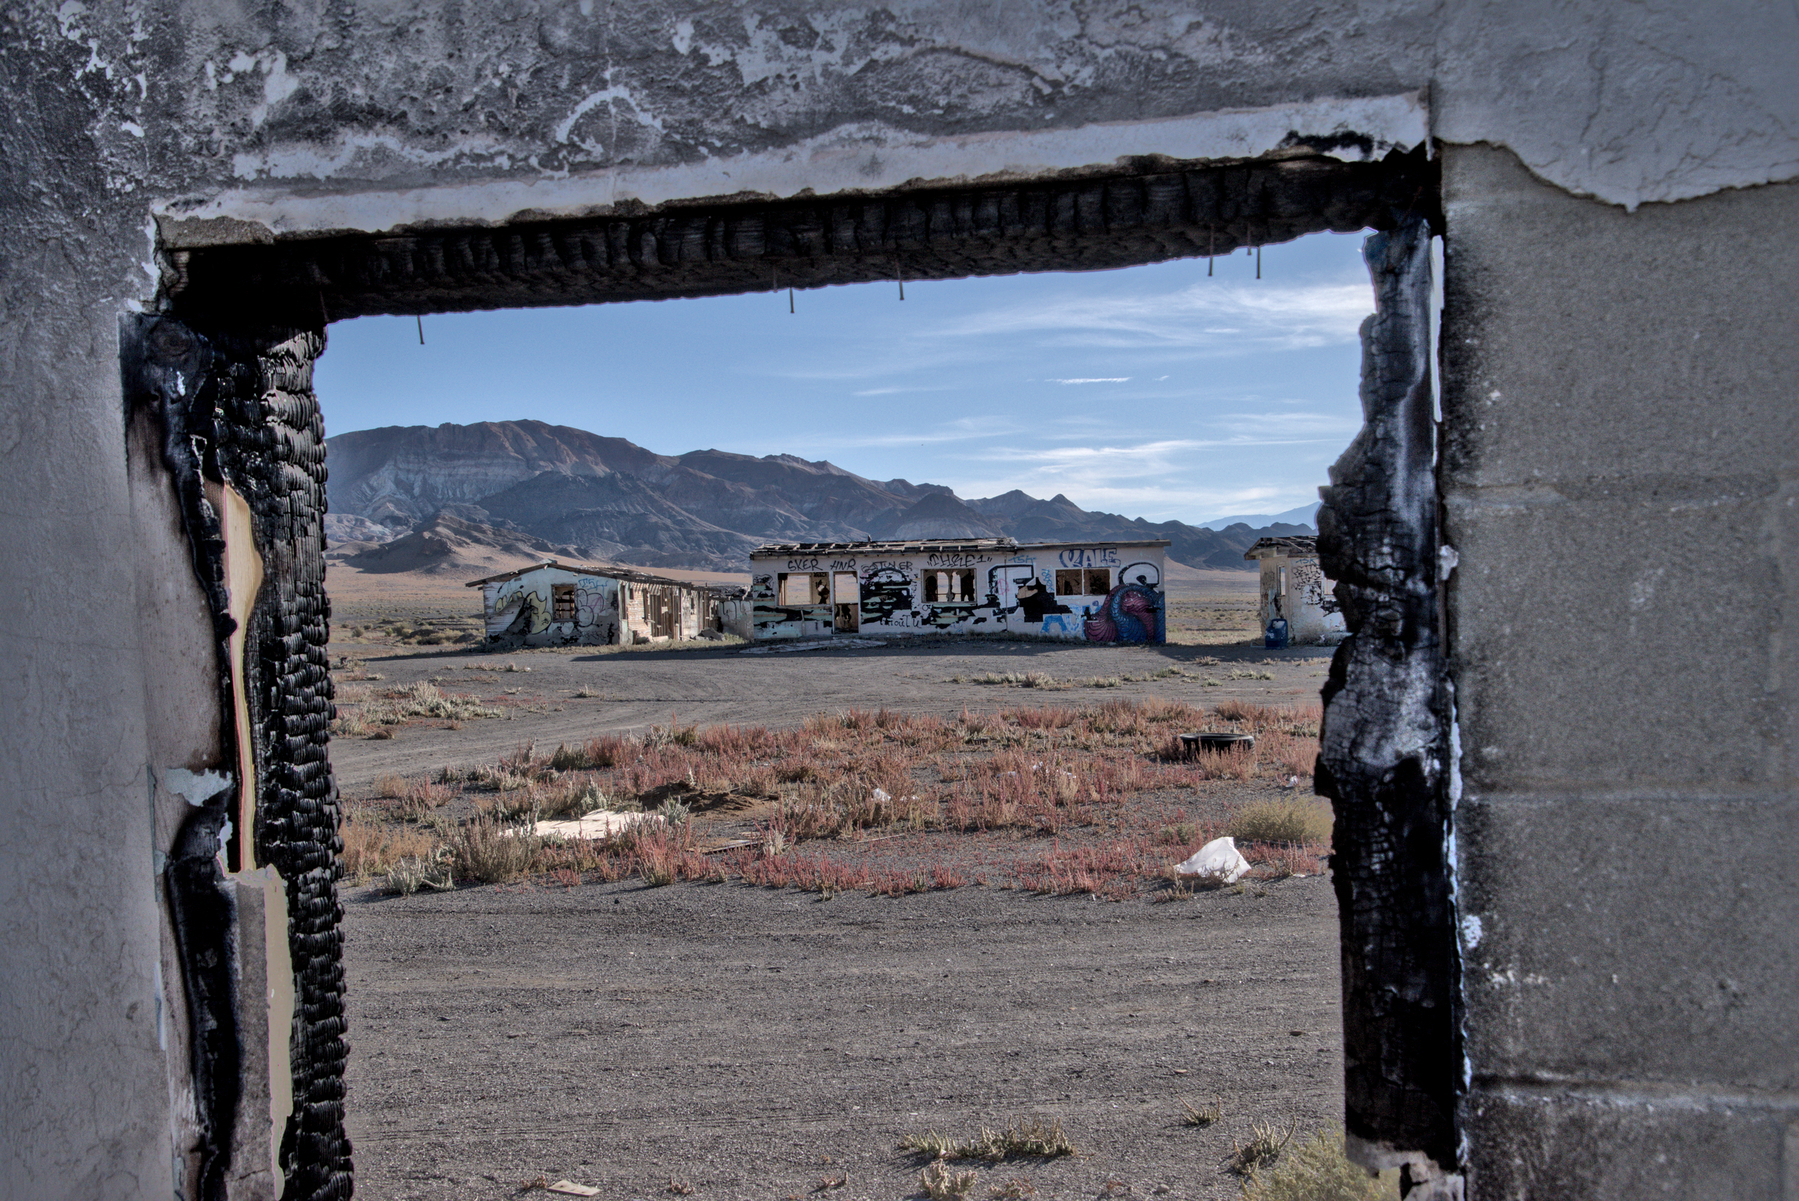 An abandoned building is seen through the door of a similarly abandoned building. The landscape is desert with mountains in the background.  Trash is spread around the ground between the two buildings.